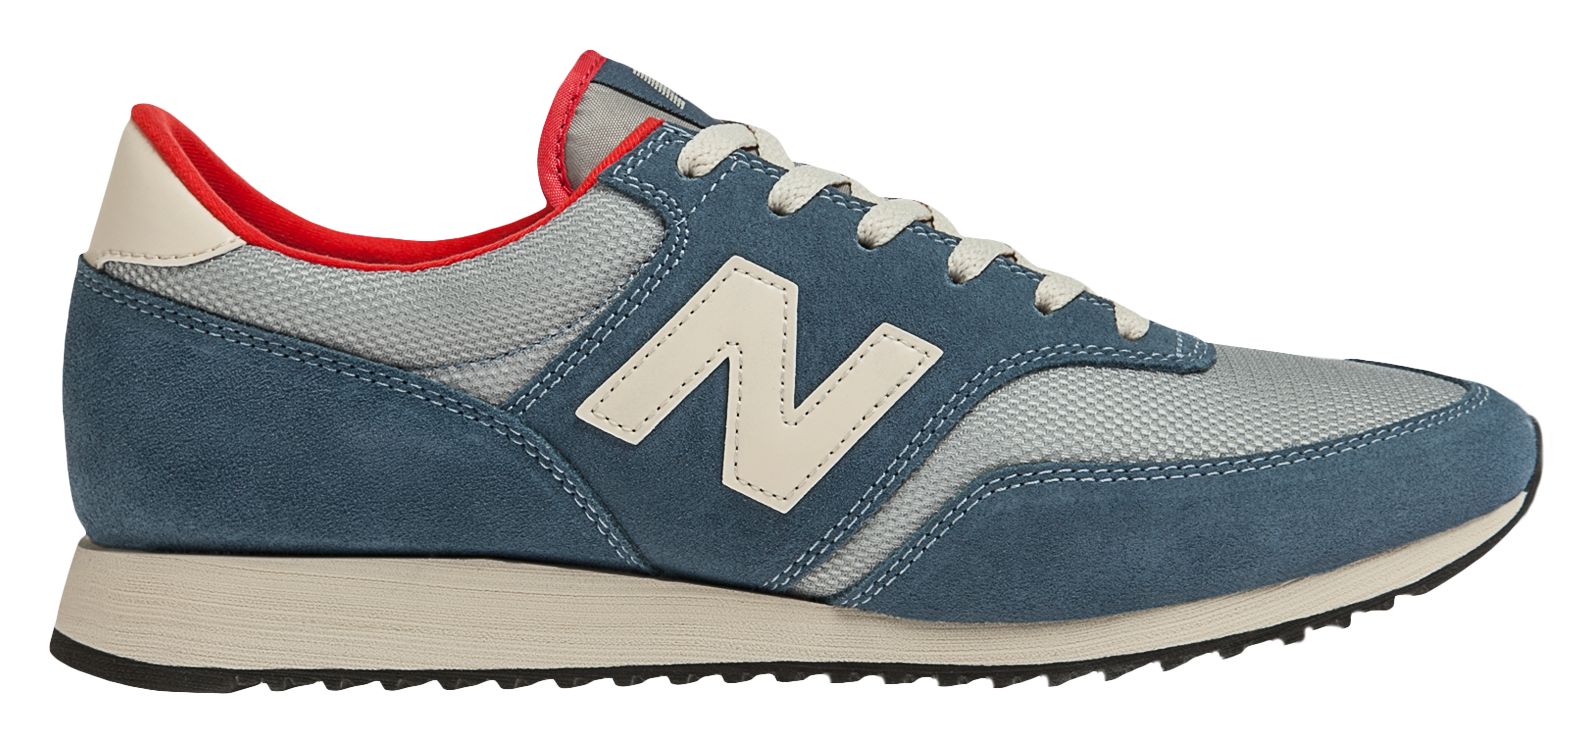 New Balance CM620 on Sale - Discounts Up to 37% Off on CM620BF at Joe's New  Balance Outlet